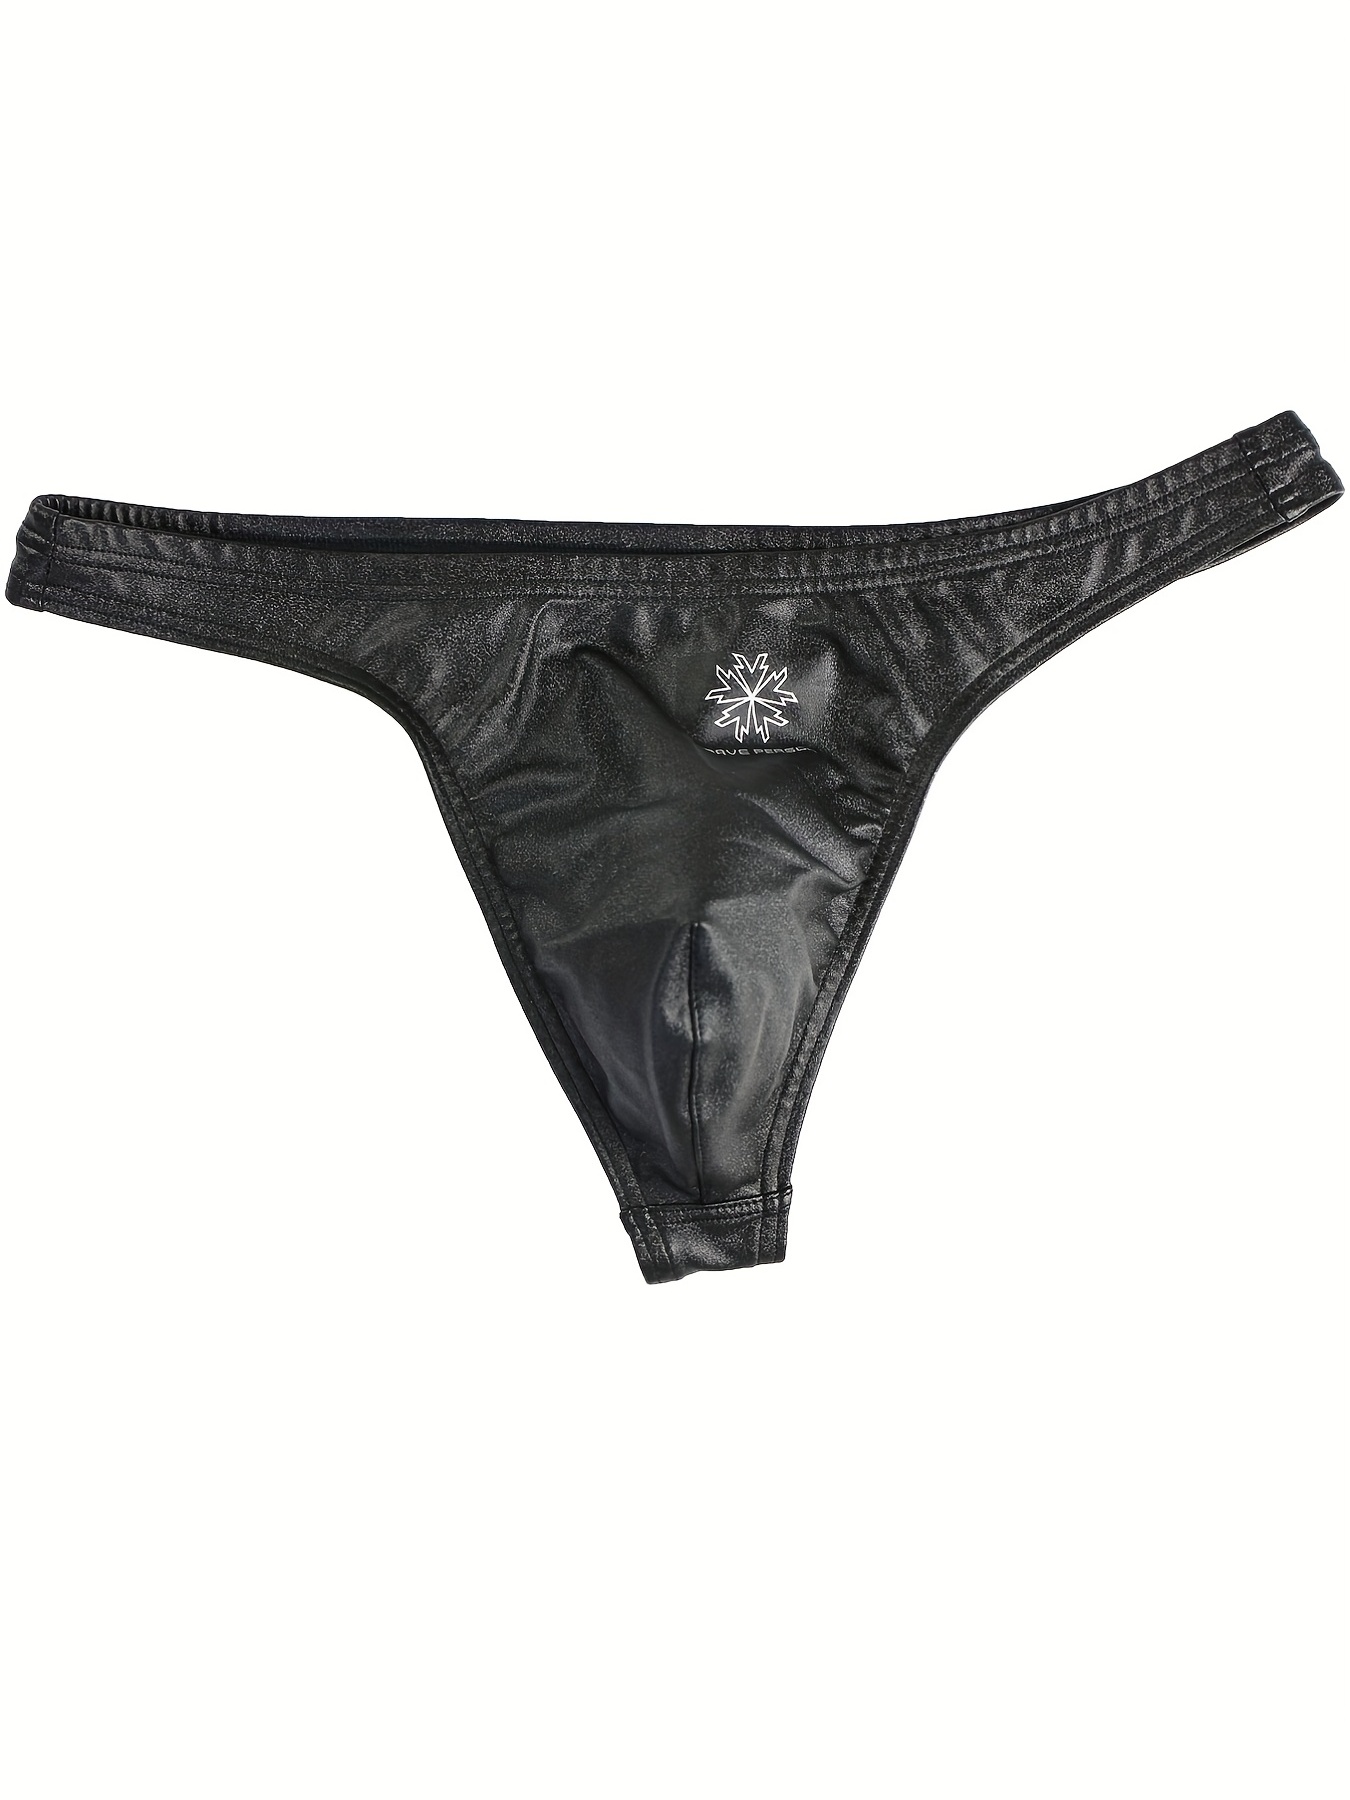 Women's Sexy Open Butt Faux Leather Crotchless Thong Panties